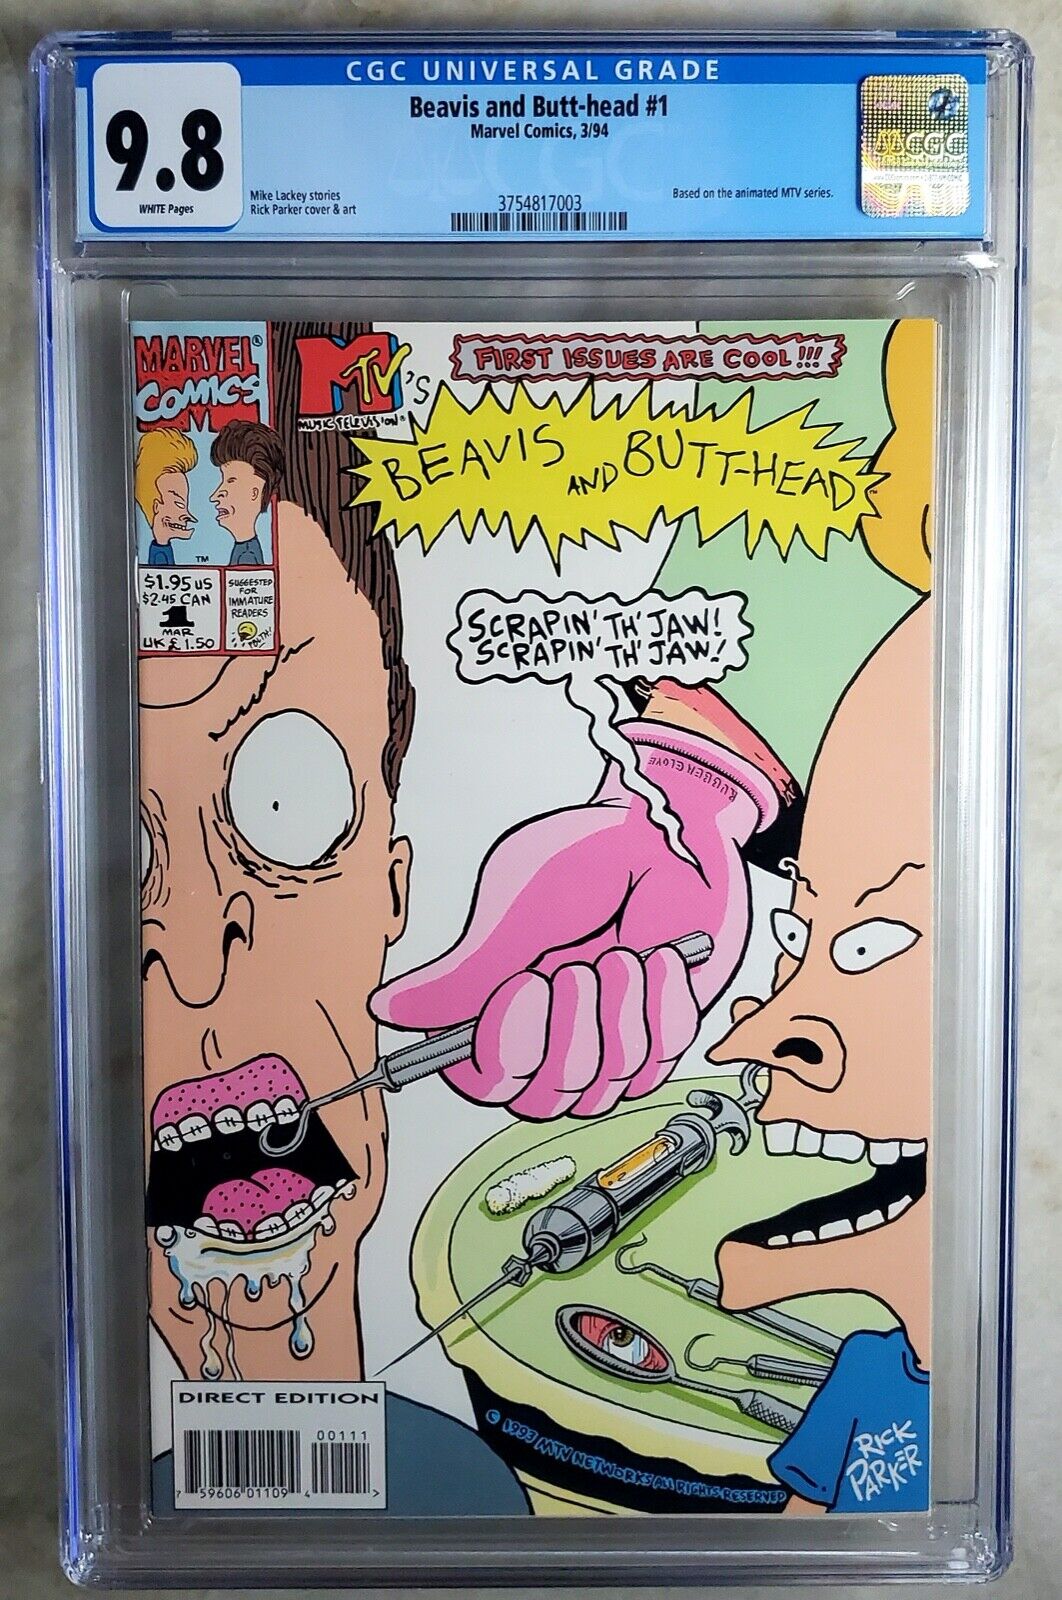 Beavis and Butt-head #1 Marvel 1994 CGC 9.8 NM/MT White Pages Comic R0062